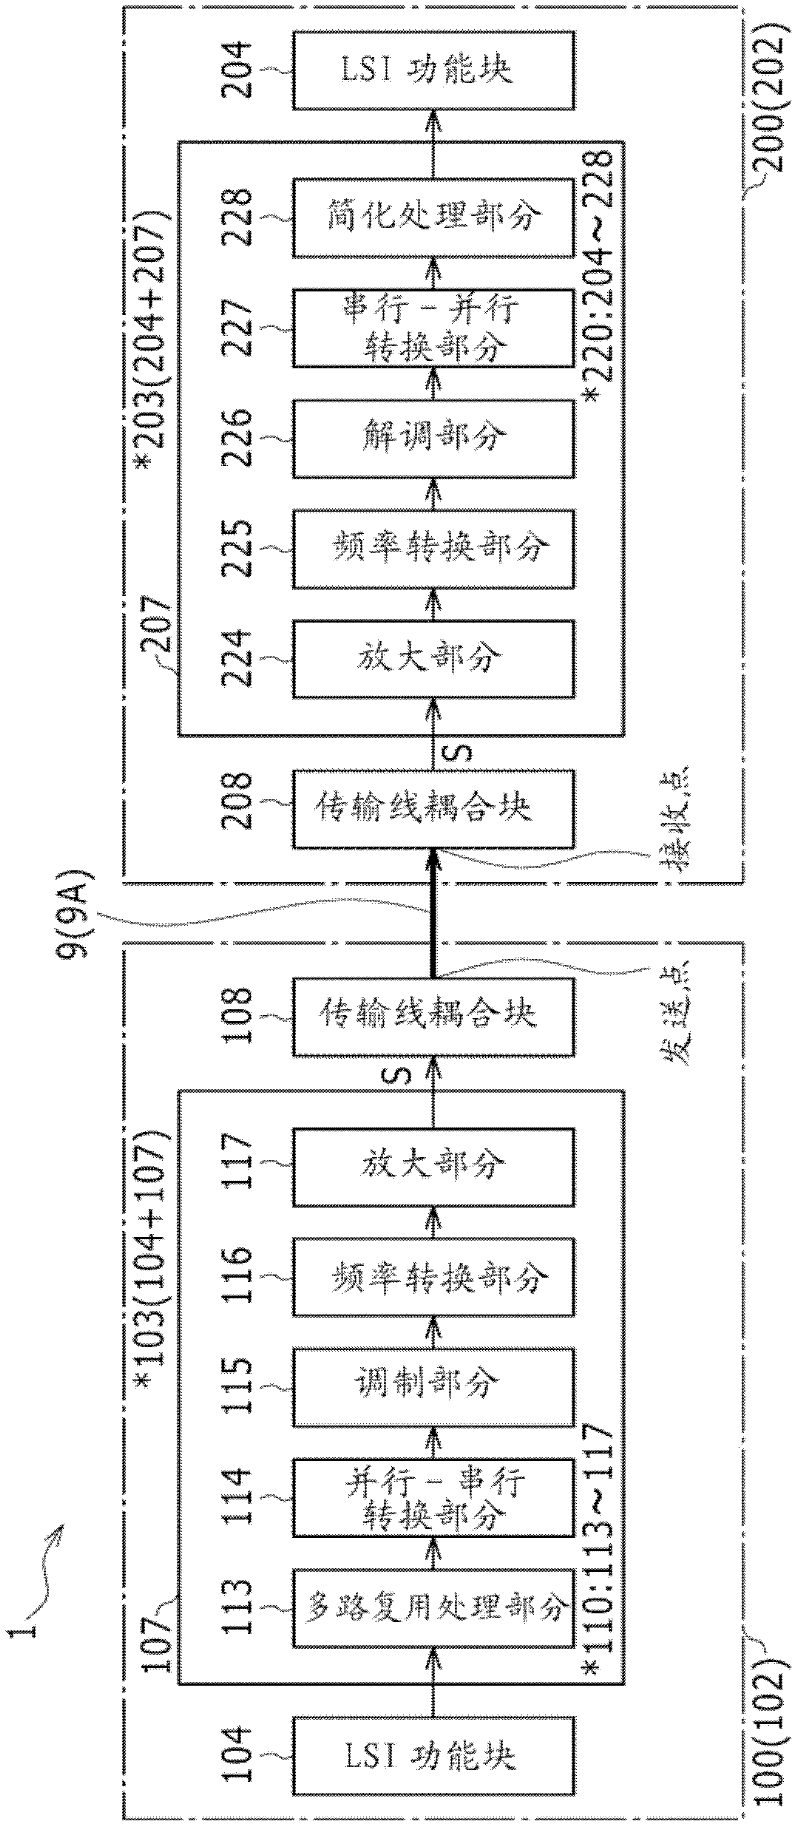 Signal transmission apparatus, electronic device, and signal transmission method